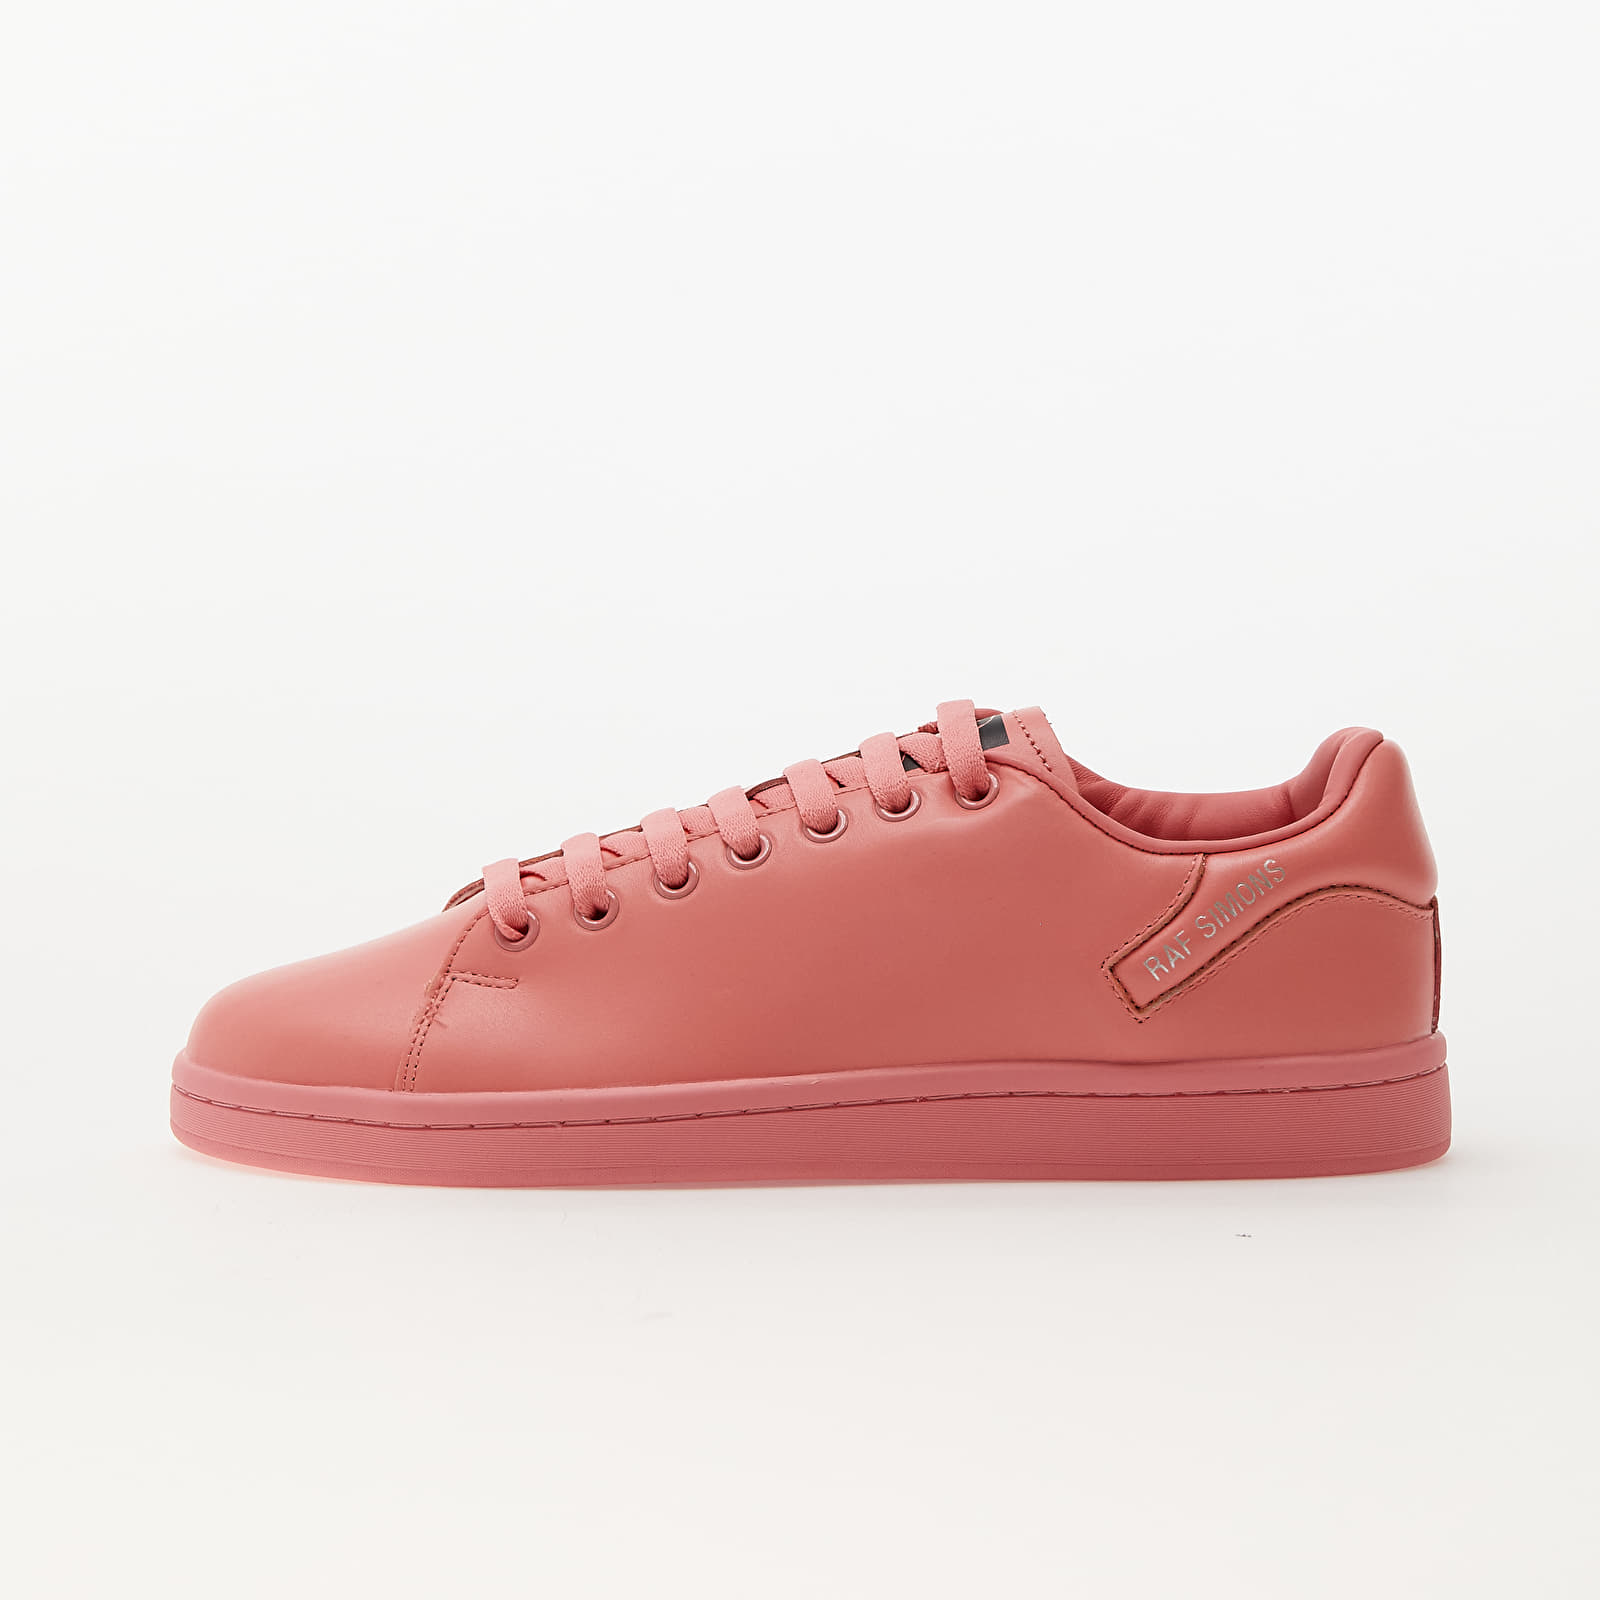 Men's shoes RAF SIMONS Orion Strawberry Ice